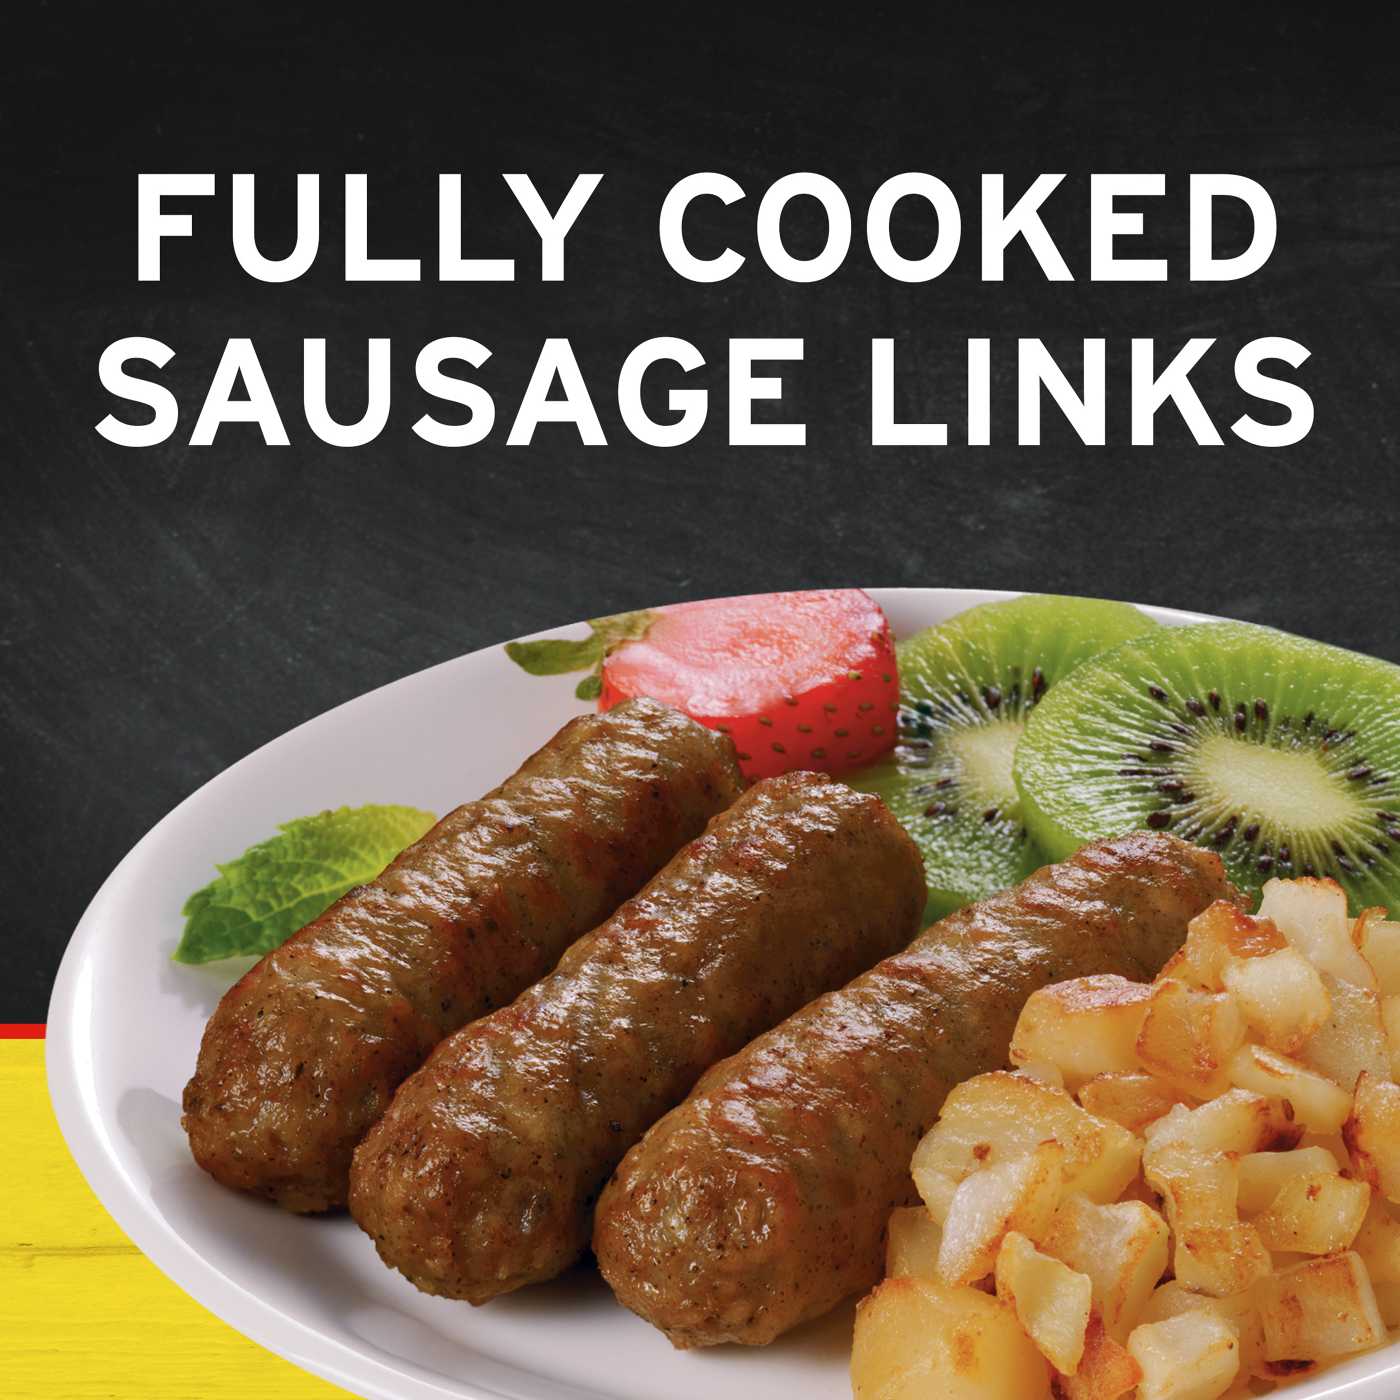 Banquet Brown ‘N Serve Fully Cooked Beef Sausage Links; image 4 of 7